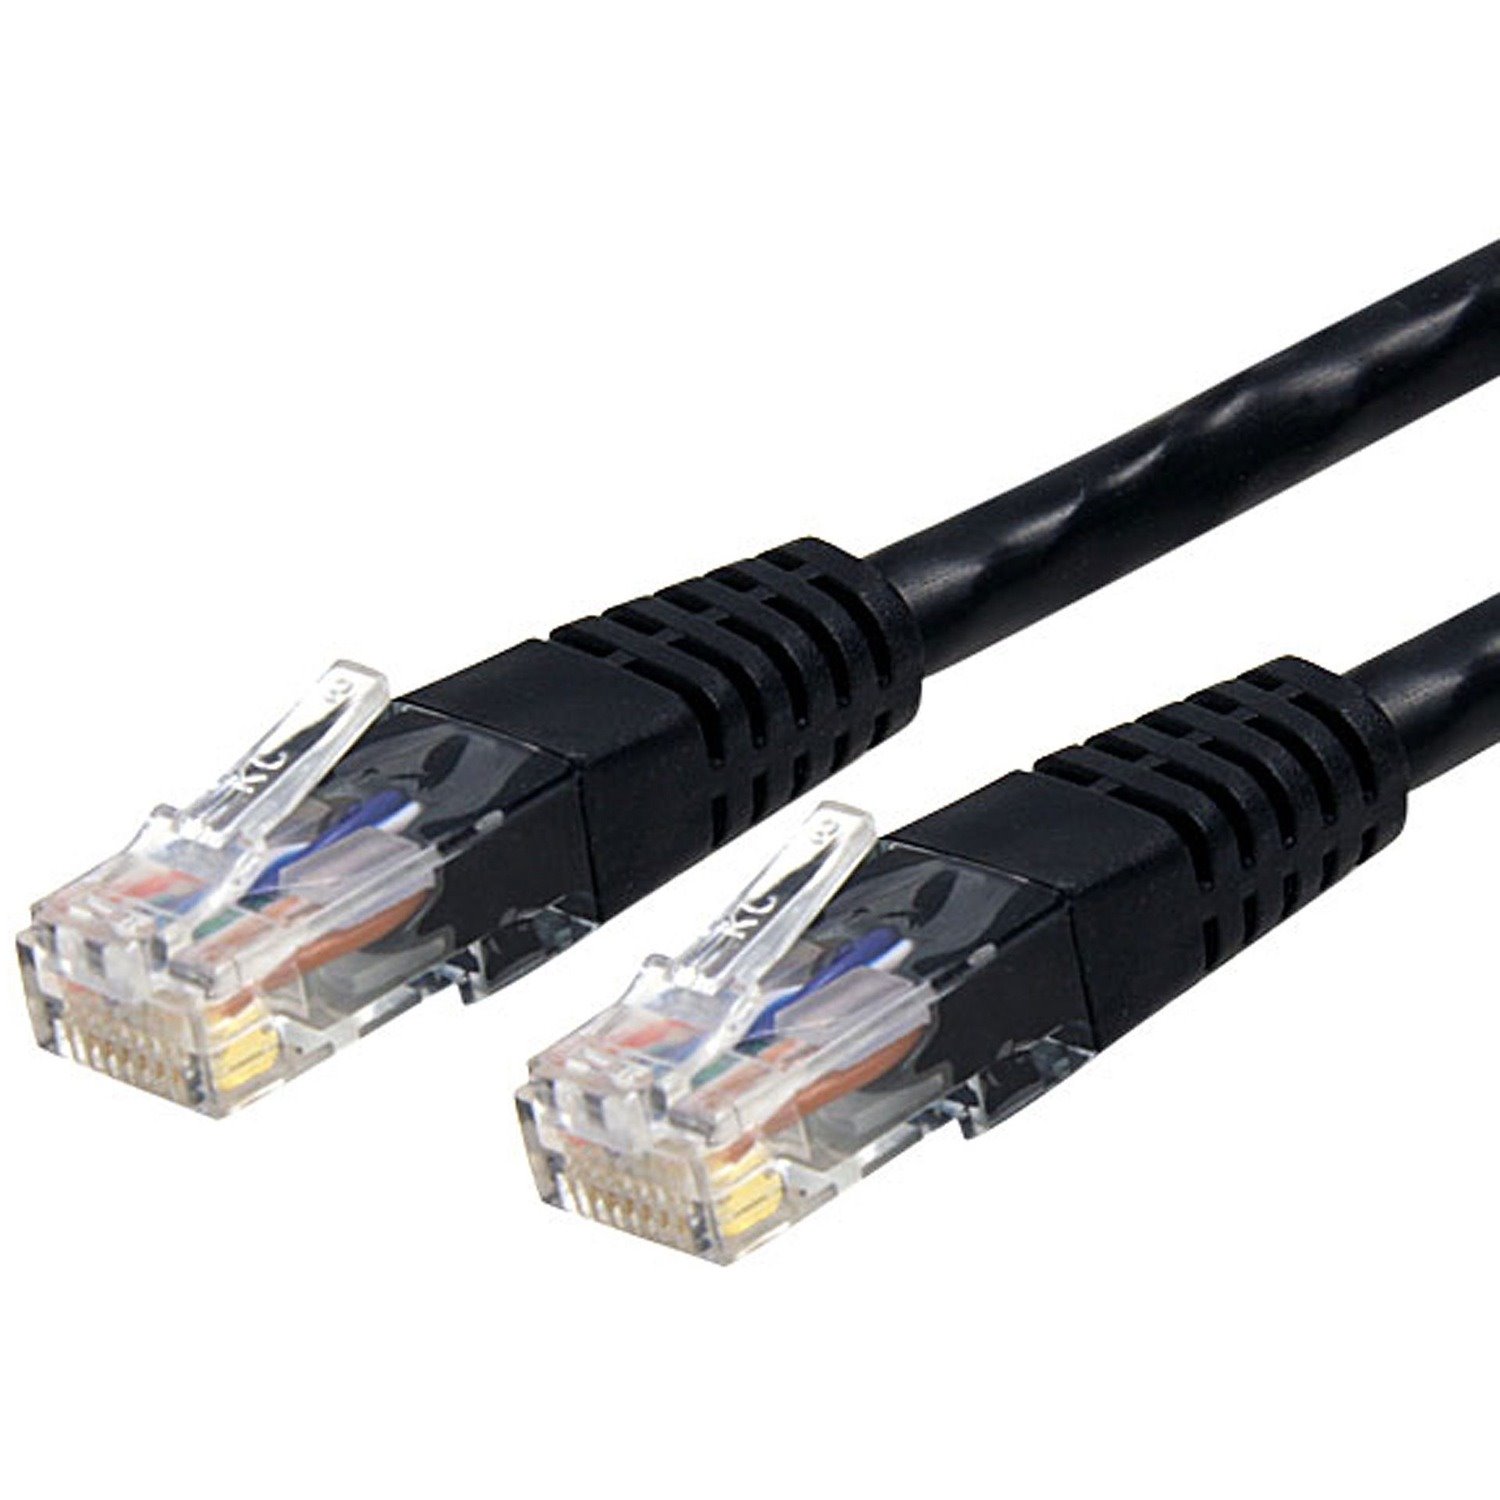 StarTech.com 3.05 m Category 6 Network Cable for Network Device